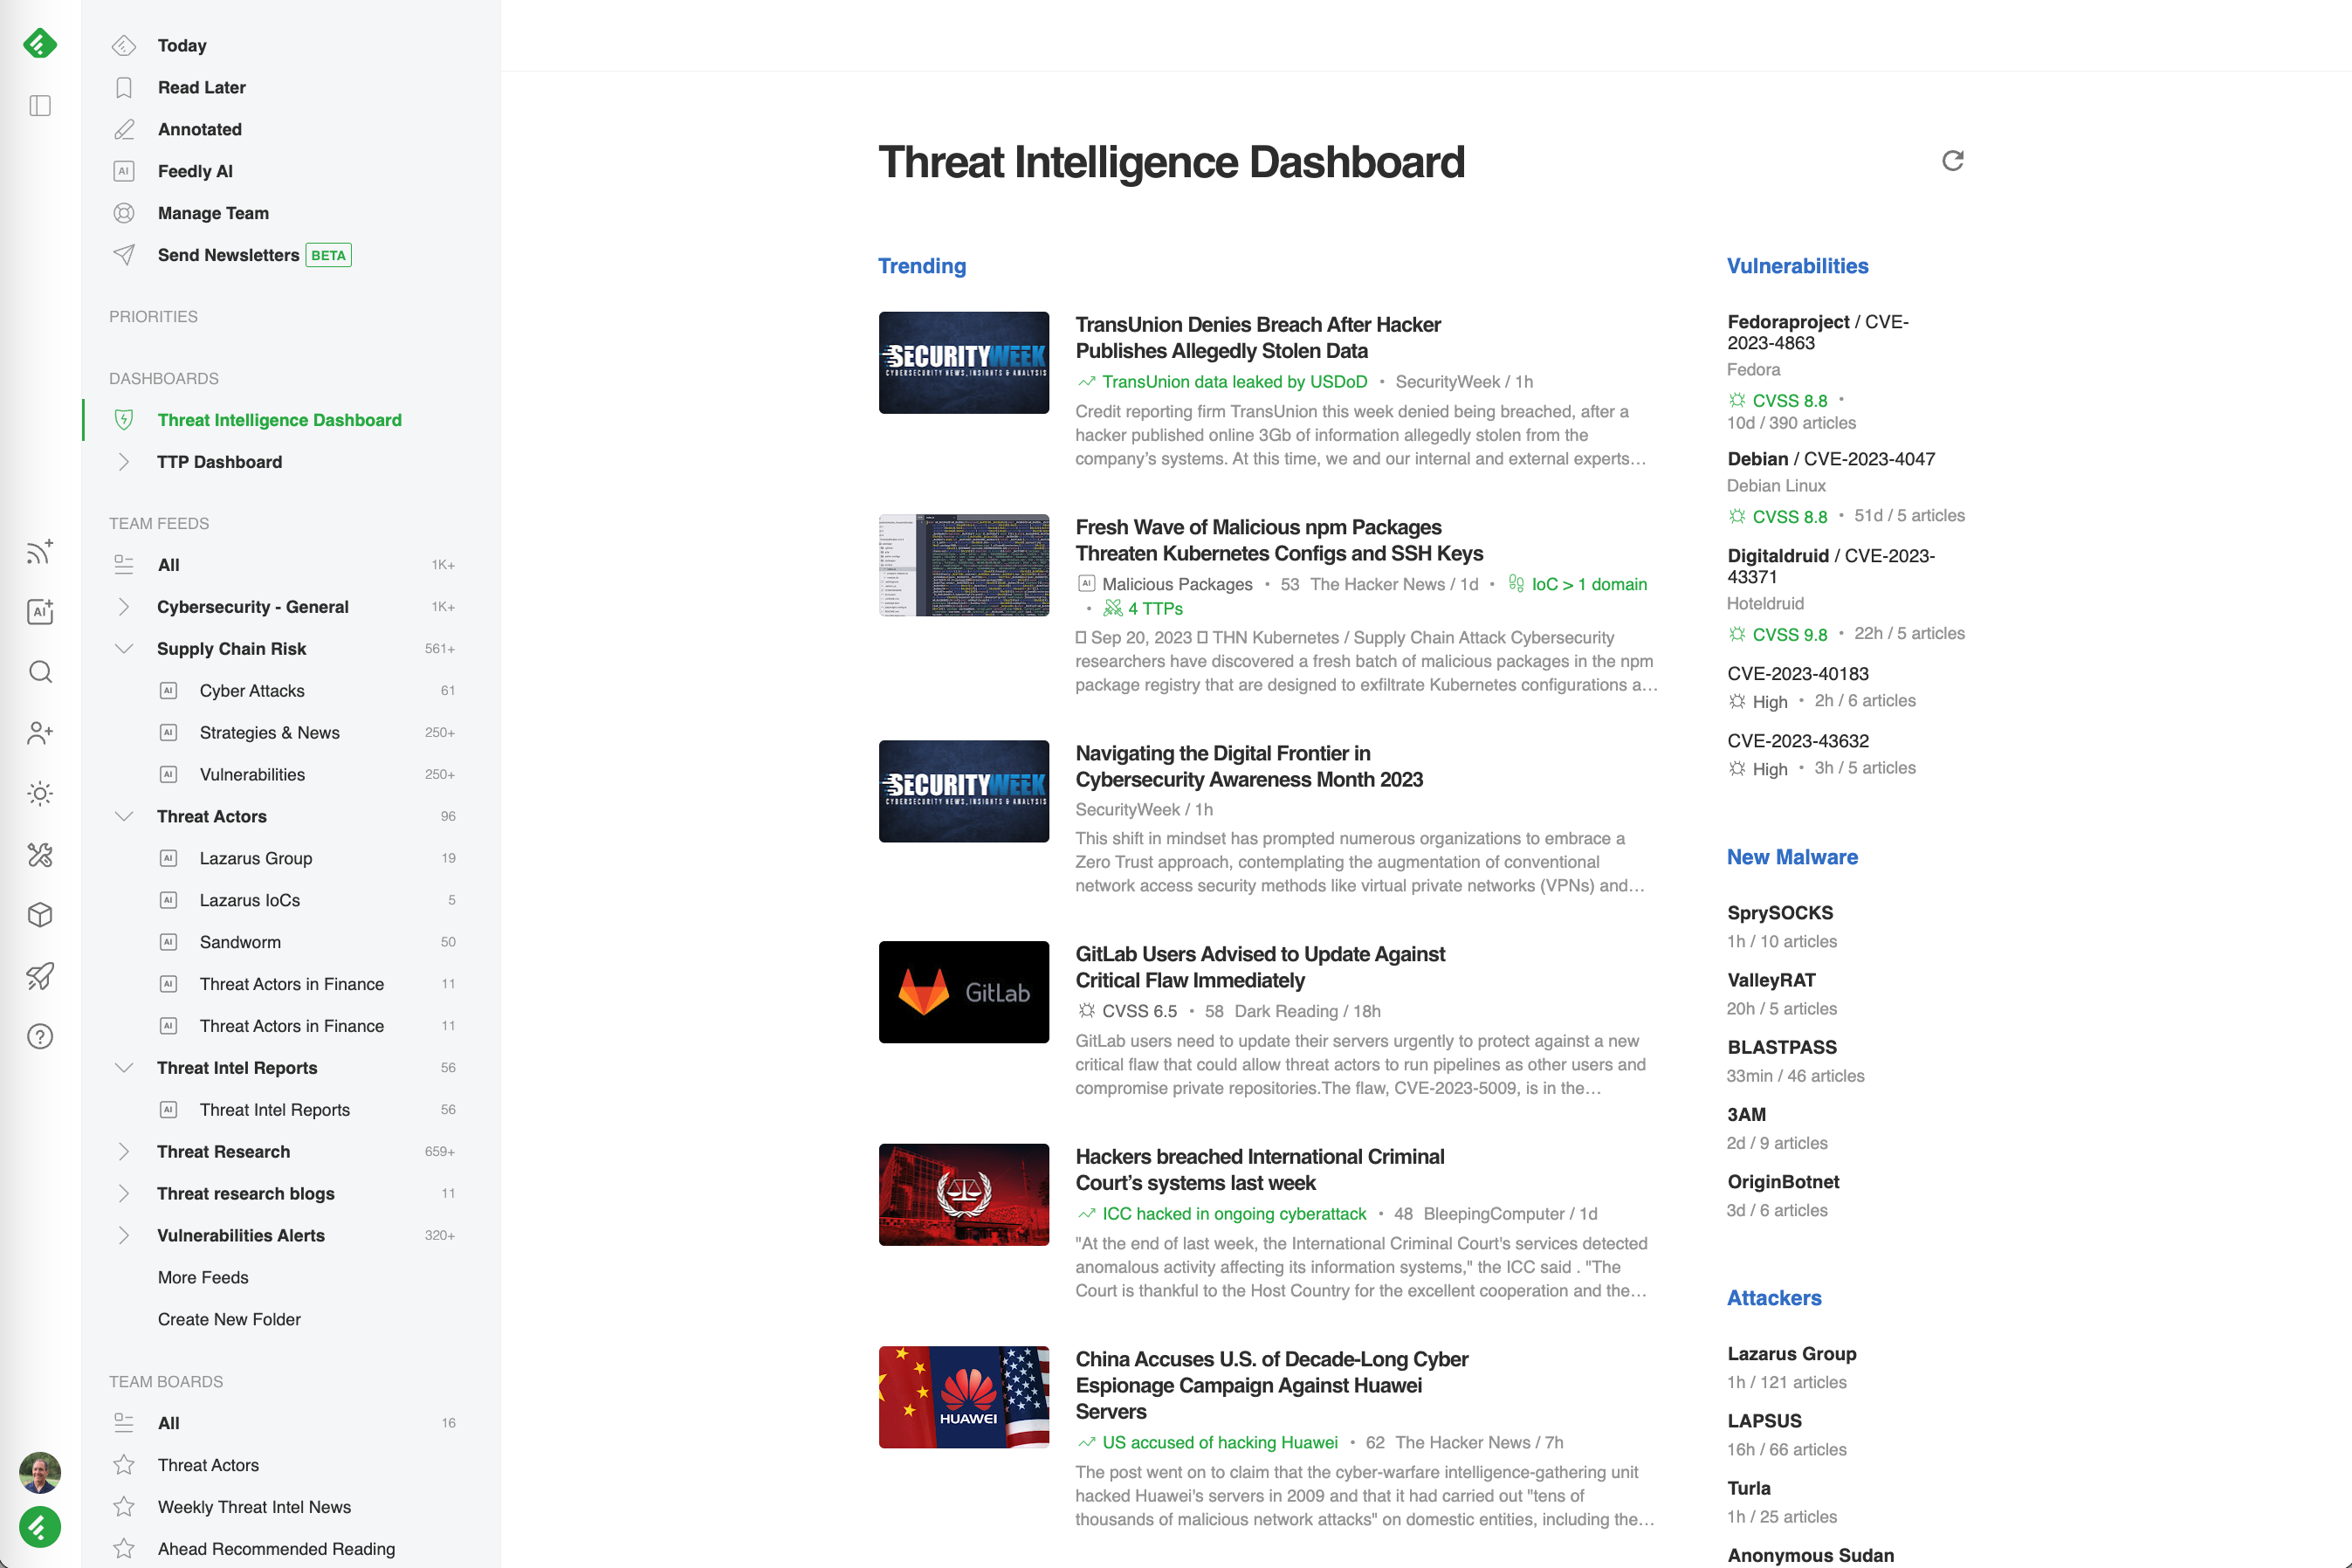 Threat Intelligence Dashboard including trending vulnerabilities and new malware. 